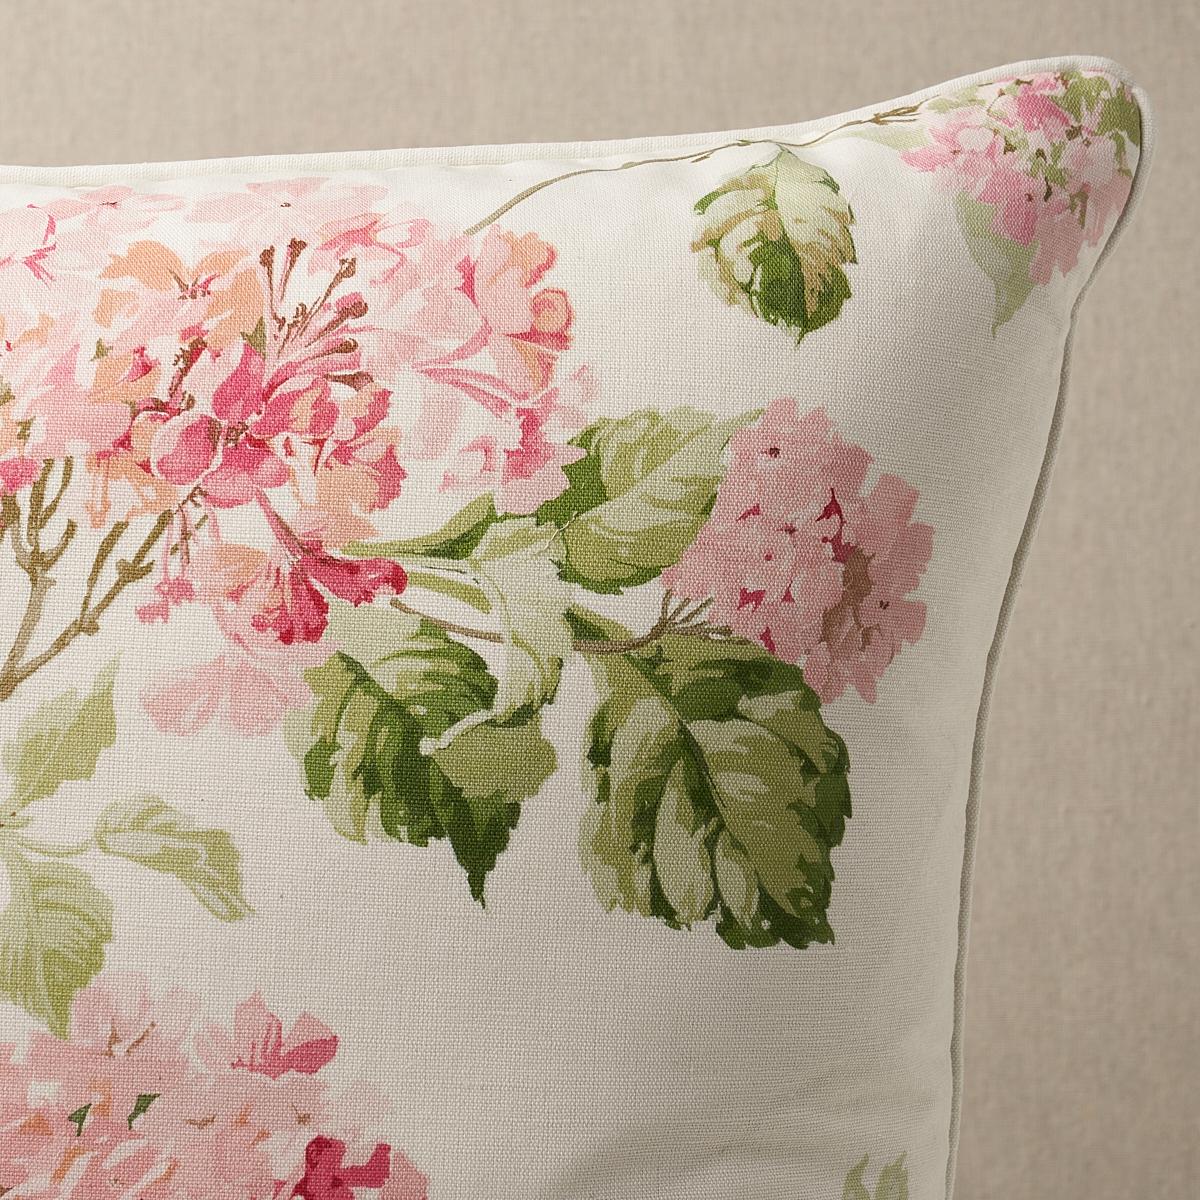 This pillow features Summer Hydrangea with a self welt finish. A classic floral with a painterly look, Summer Hydrangea in blush is beautifully printed on a soft textured cotton-linen ground. Pillow includes a feather/down fill insert and hidden